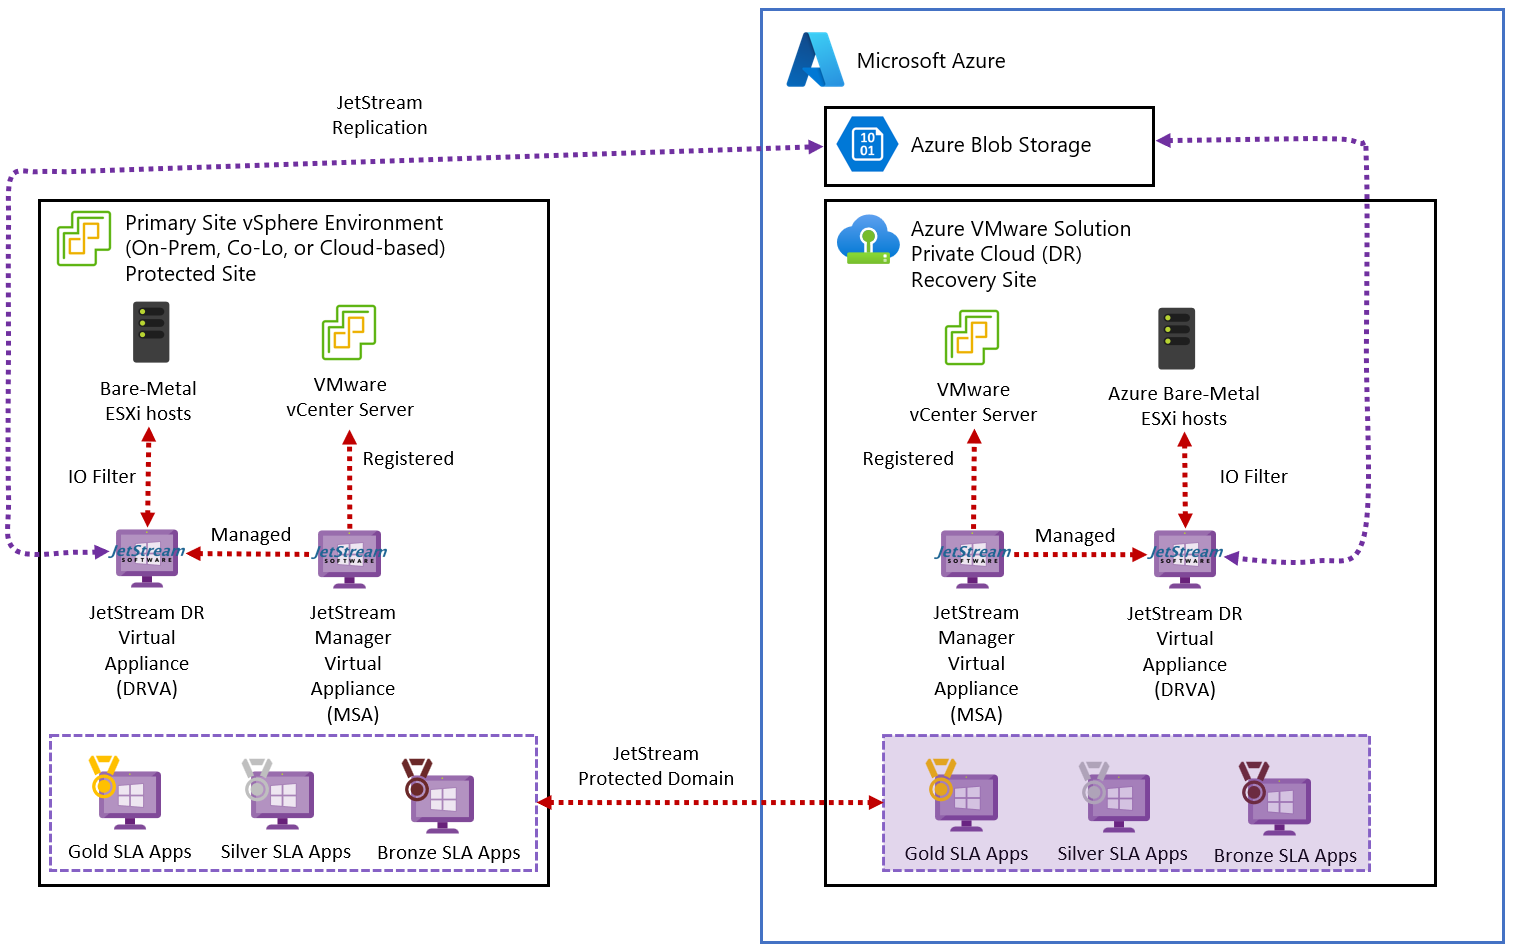 Diagram showing the on-premises to Azure VMware Solution private cloud JetStream deployment.